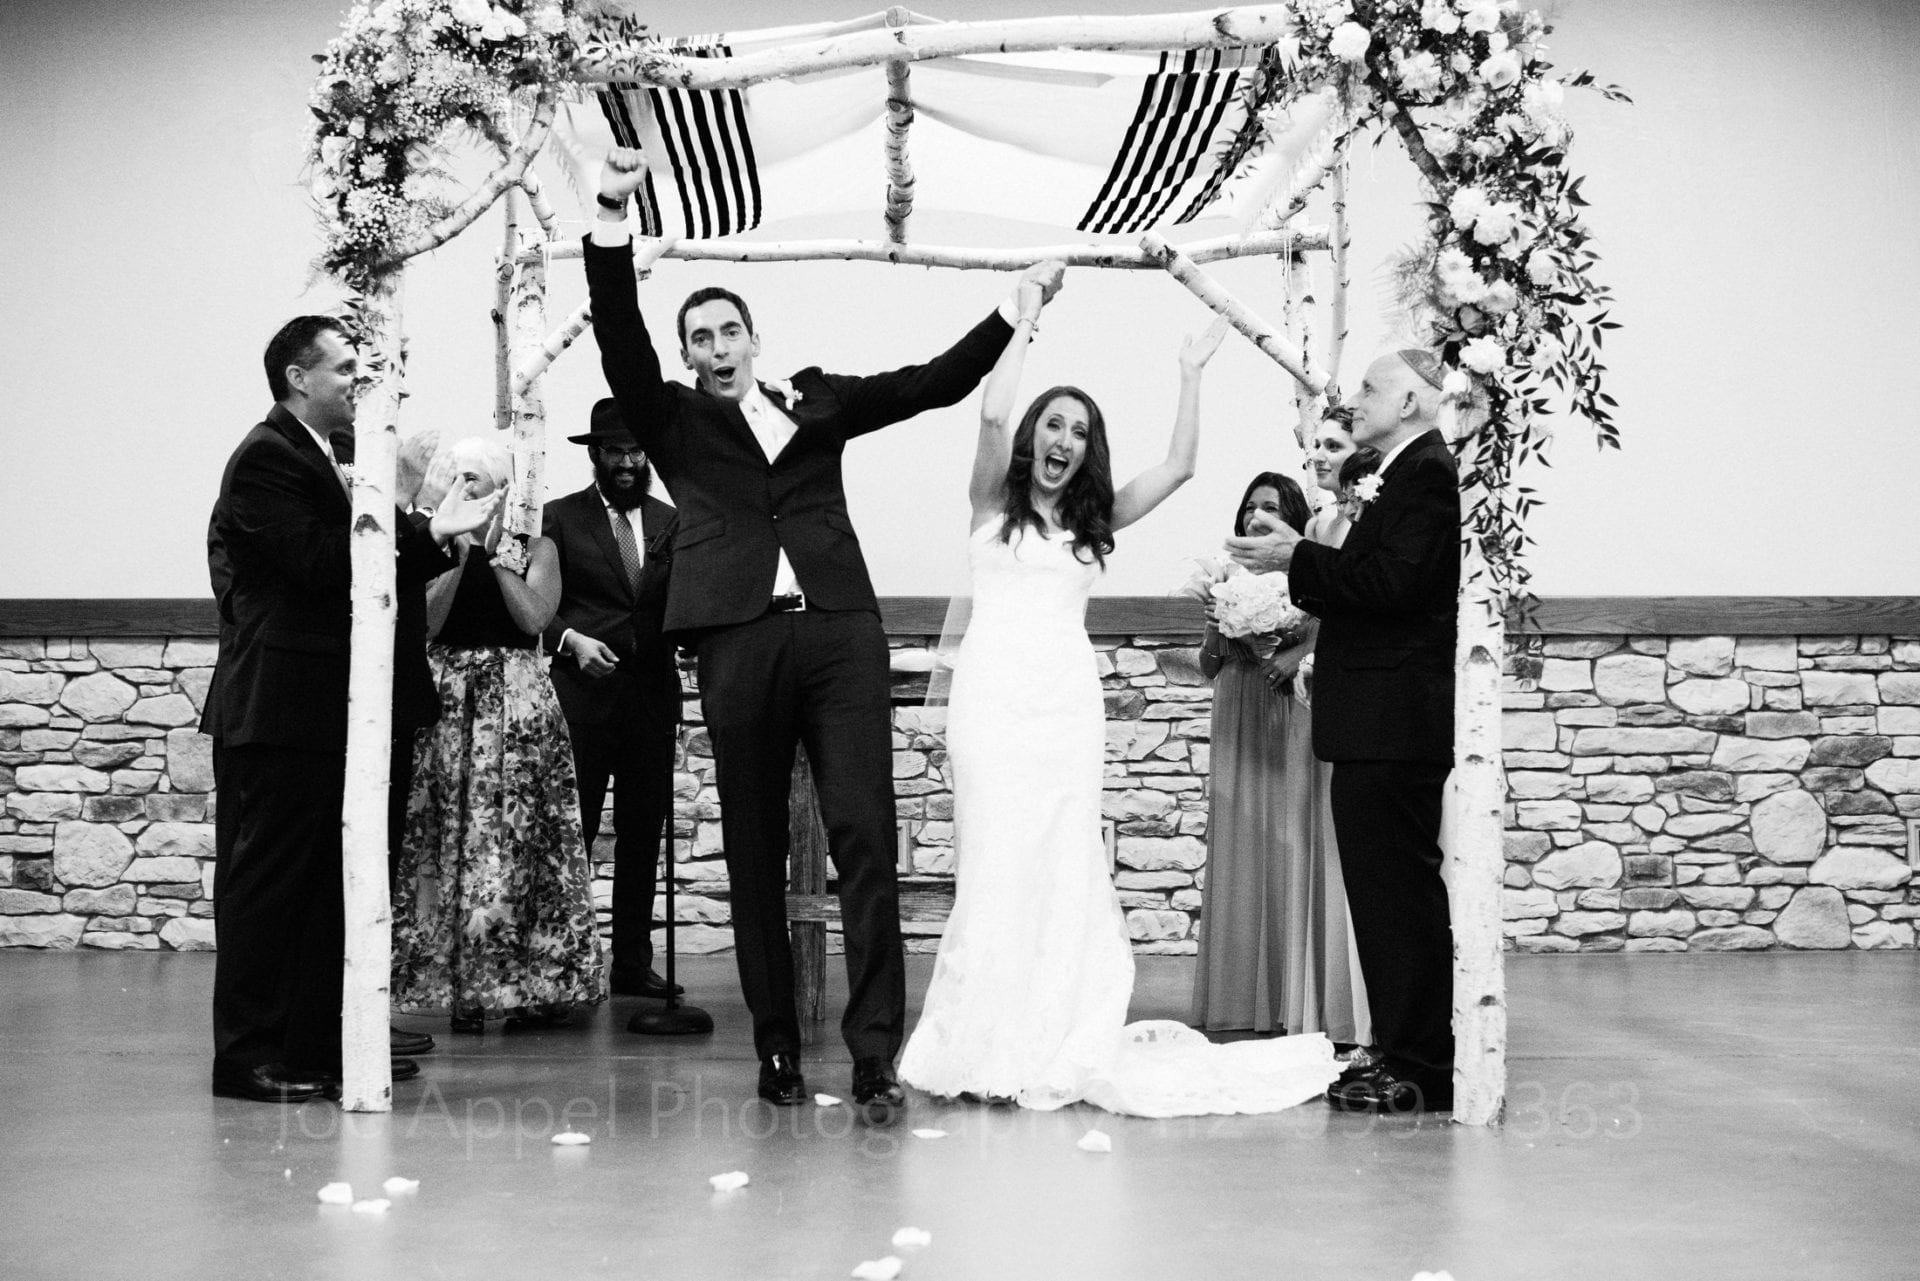 A bride and groom cheer and hold their hands in the air beneath the chuppah at the end of their wedding ceremony.